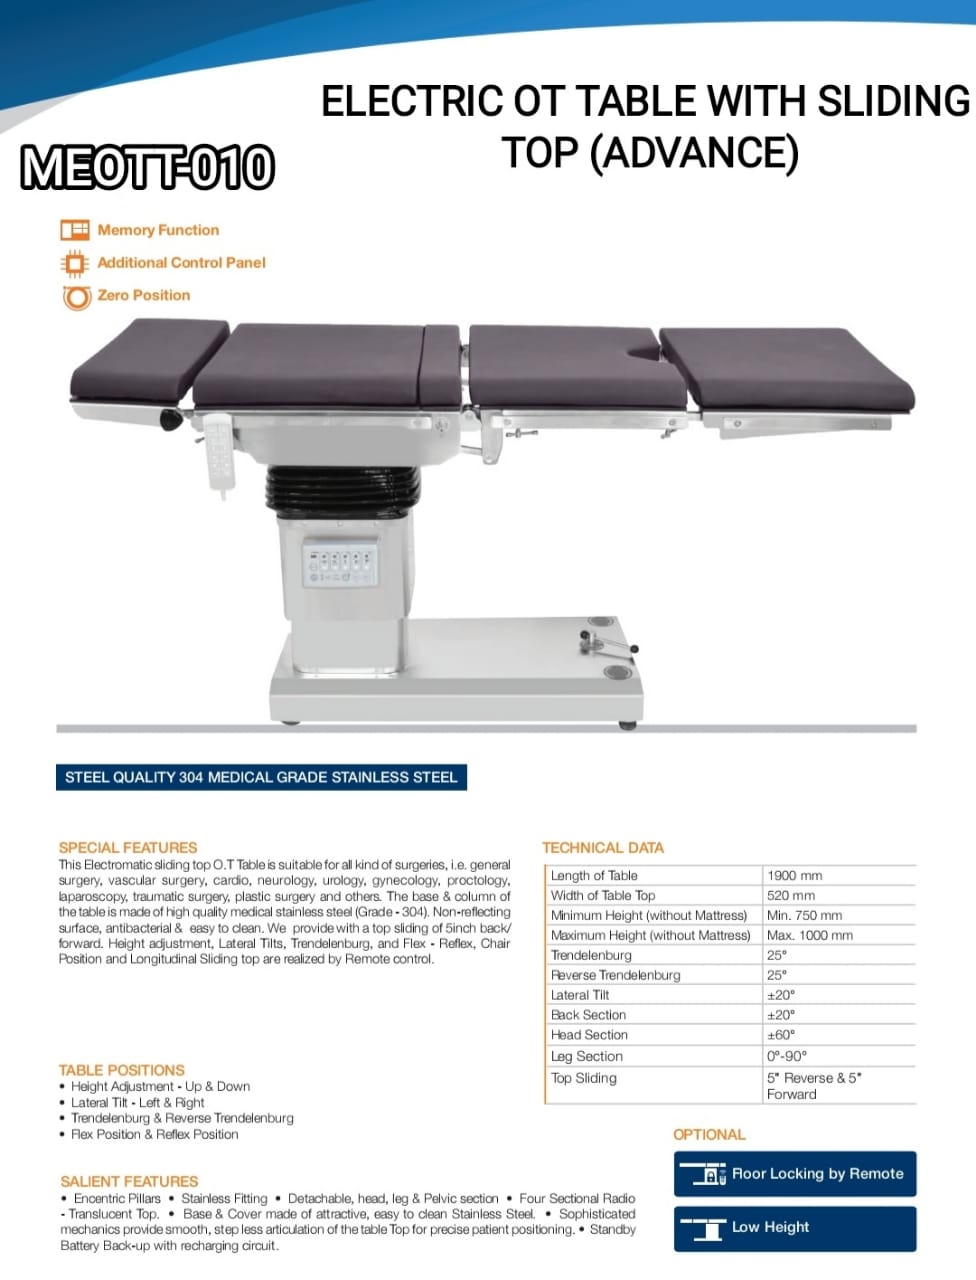 ELECTRIC OT TABLE WITH SLIDING TOP ADVANCE